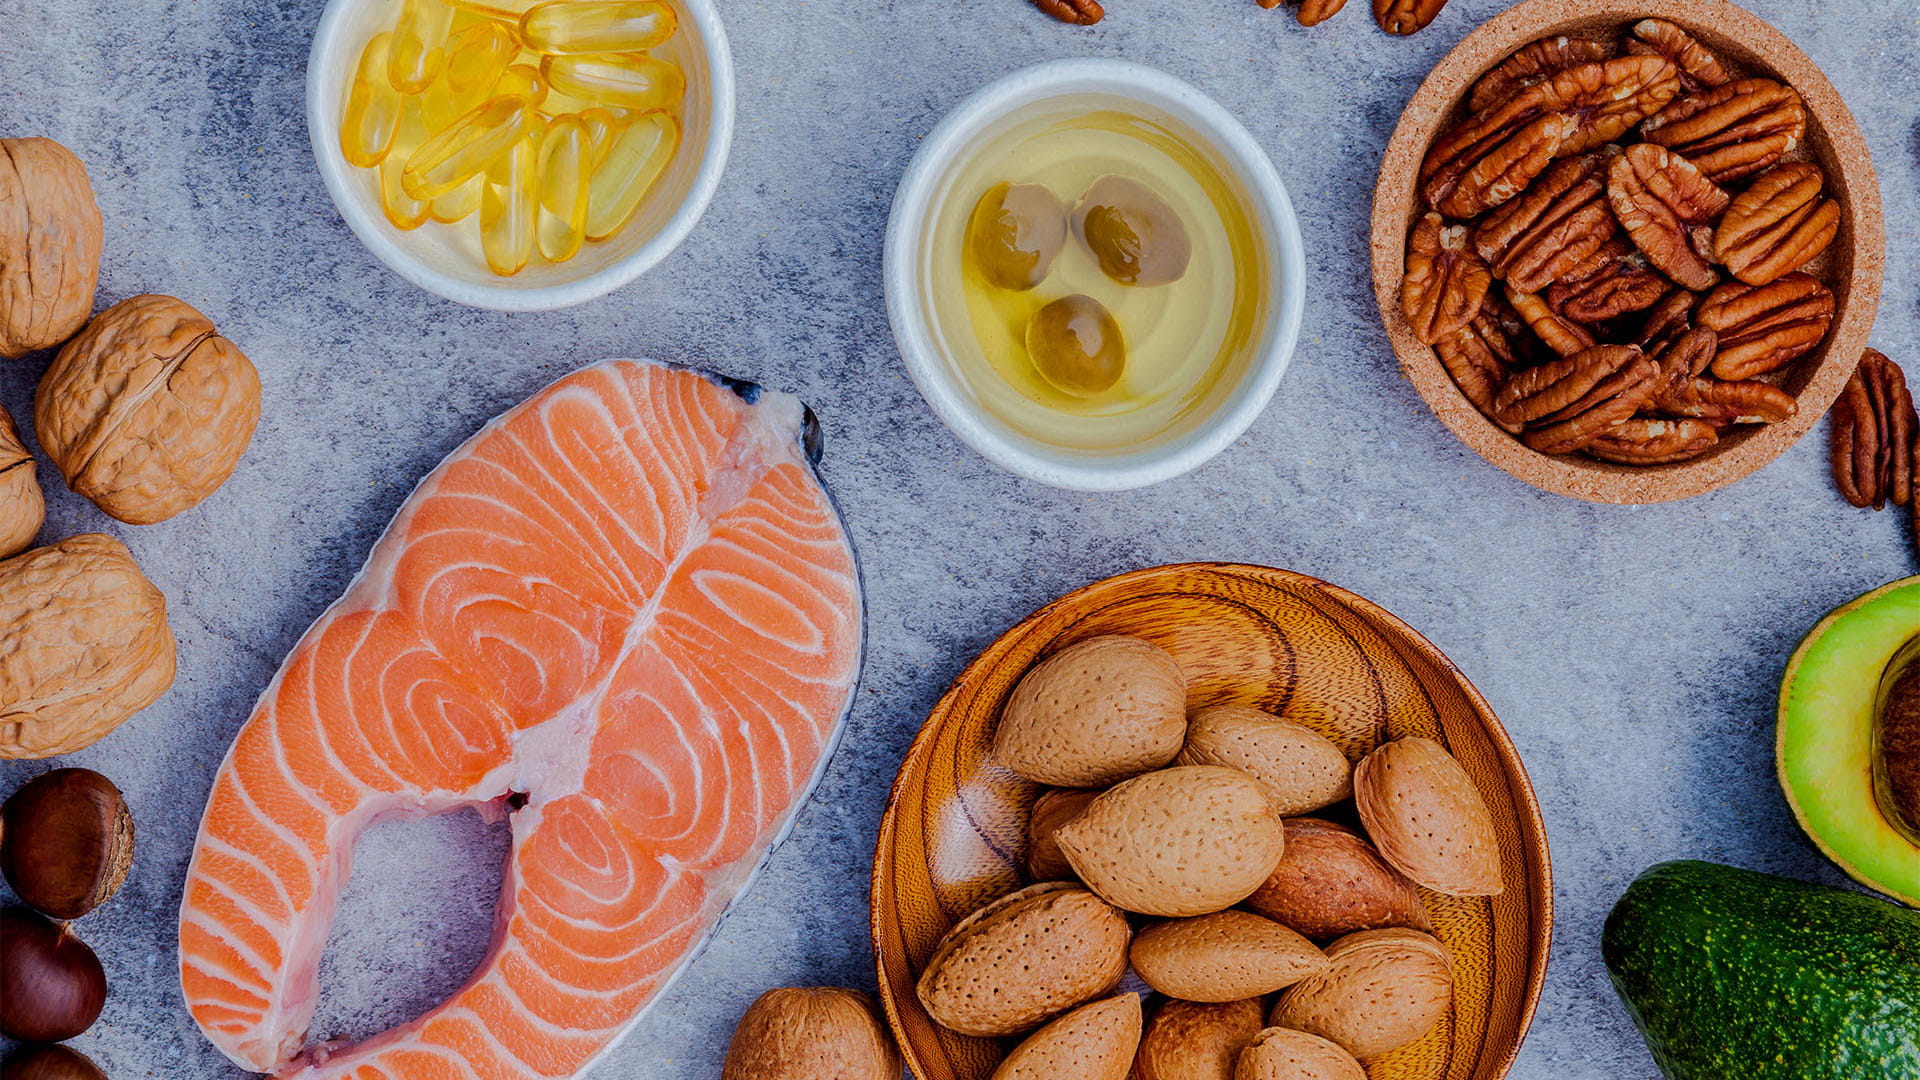 Article, Good vs. bad fats | Beneficial Fats for a Healthy Diet